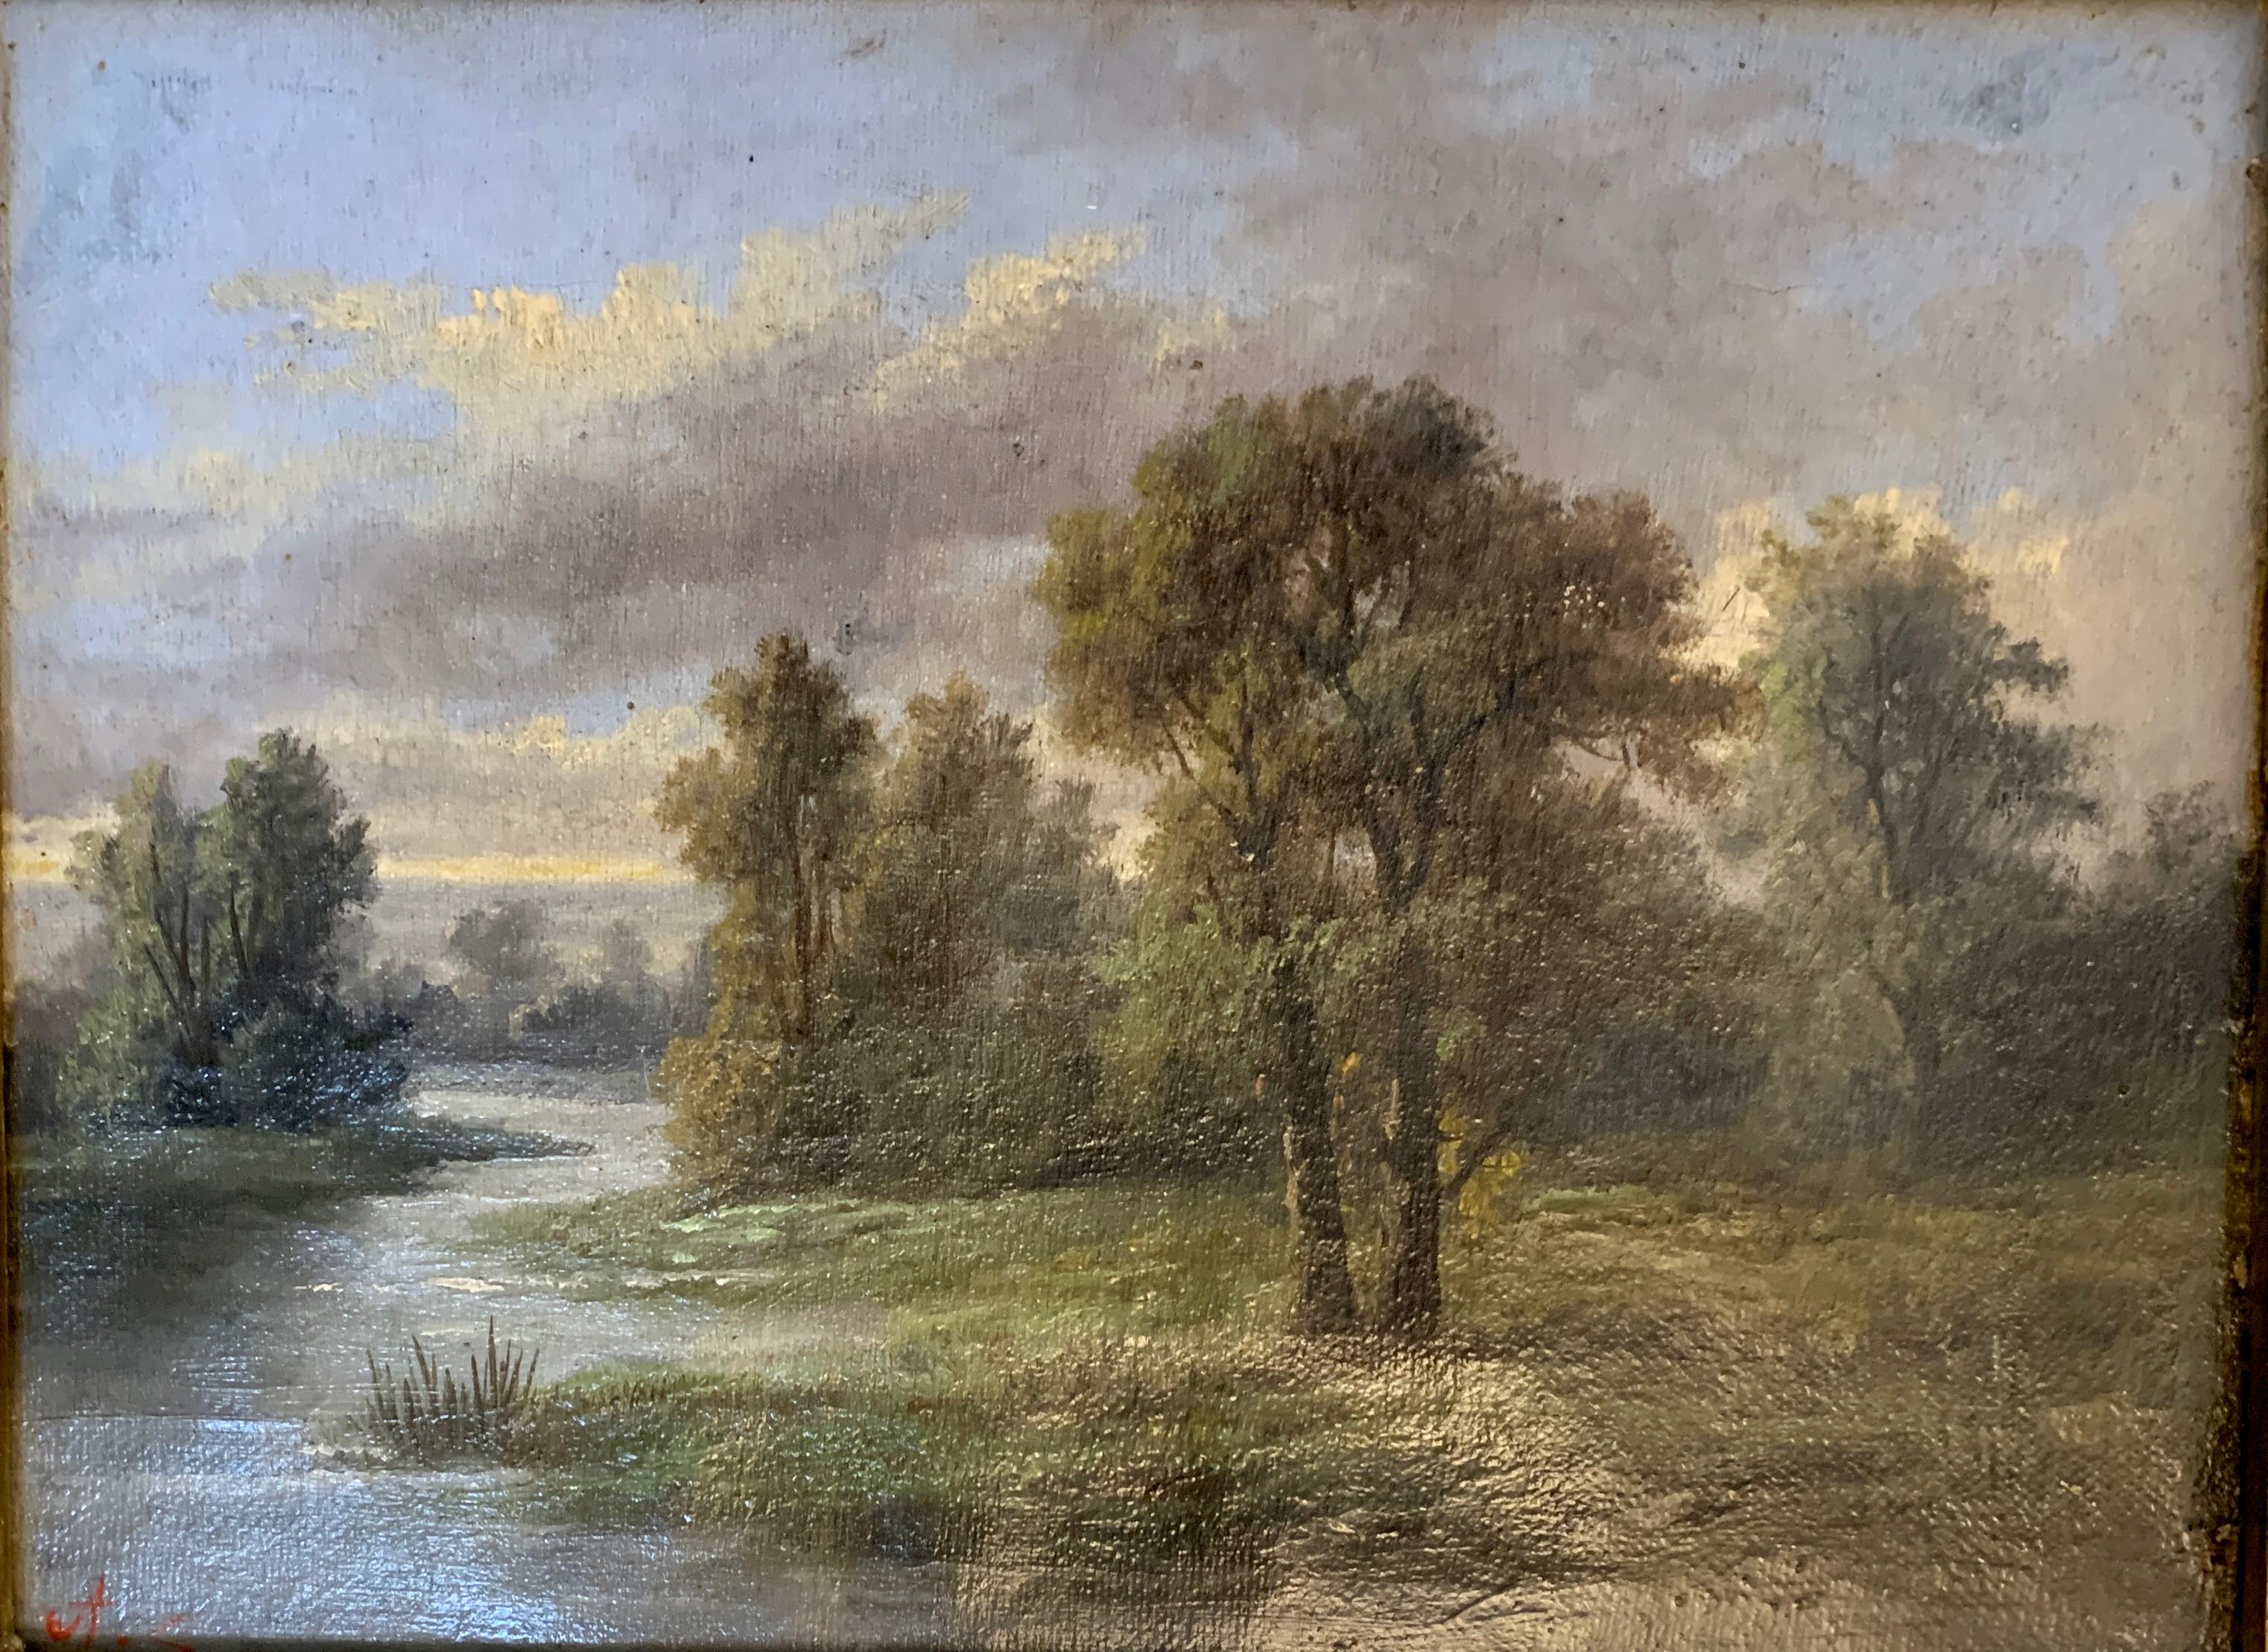 19th century English landscape with Oak and Yew trees on a pathway by a stream - Victorian Painting by Ada Stone